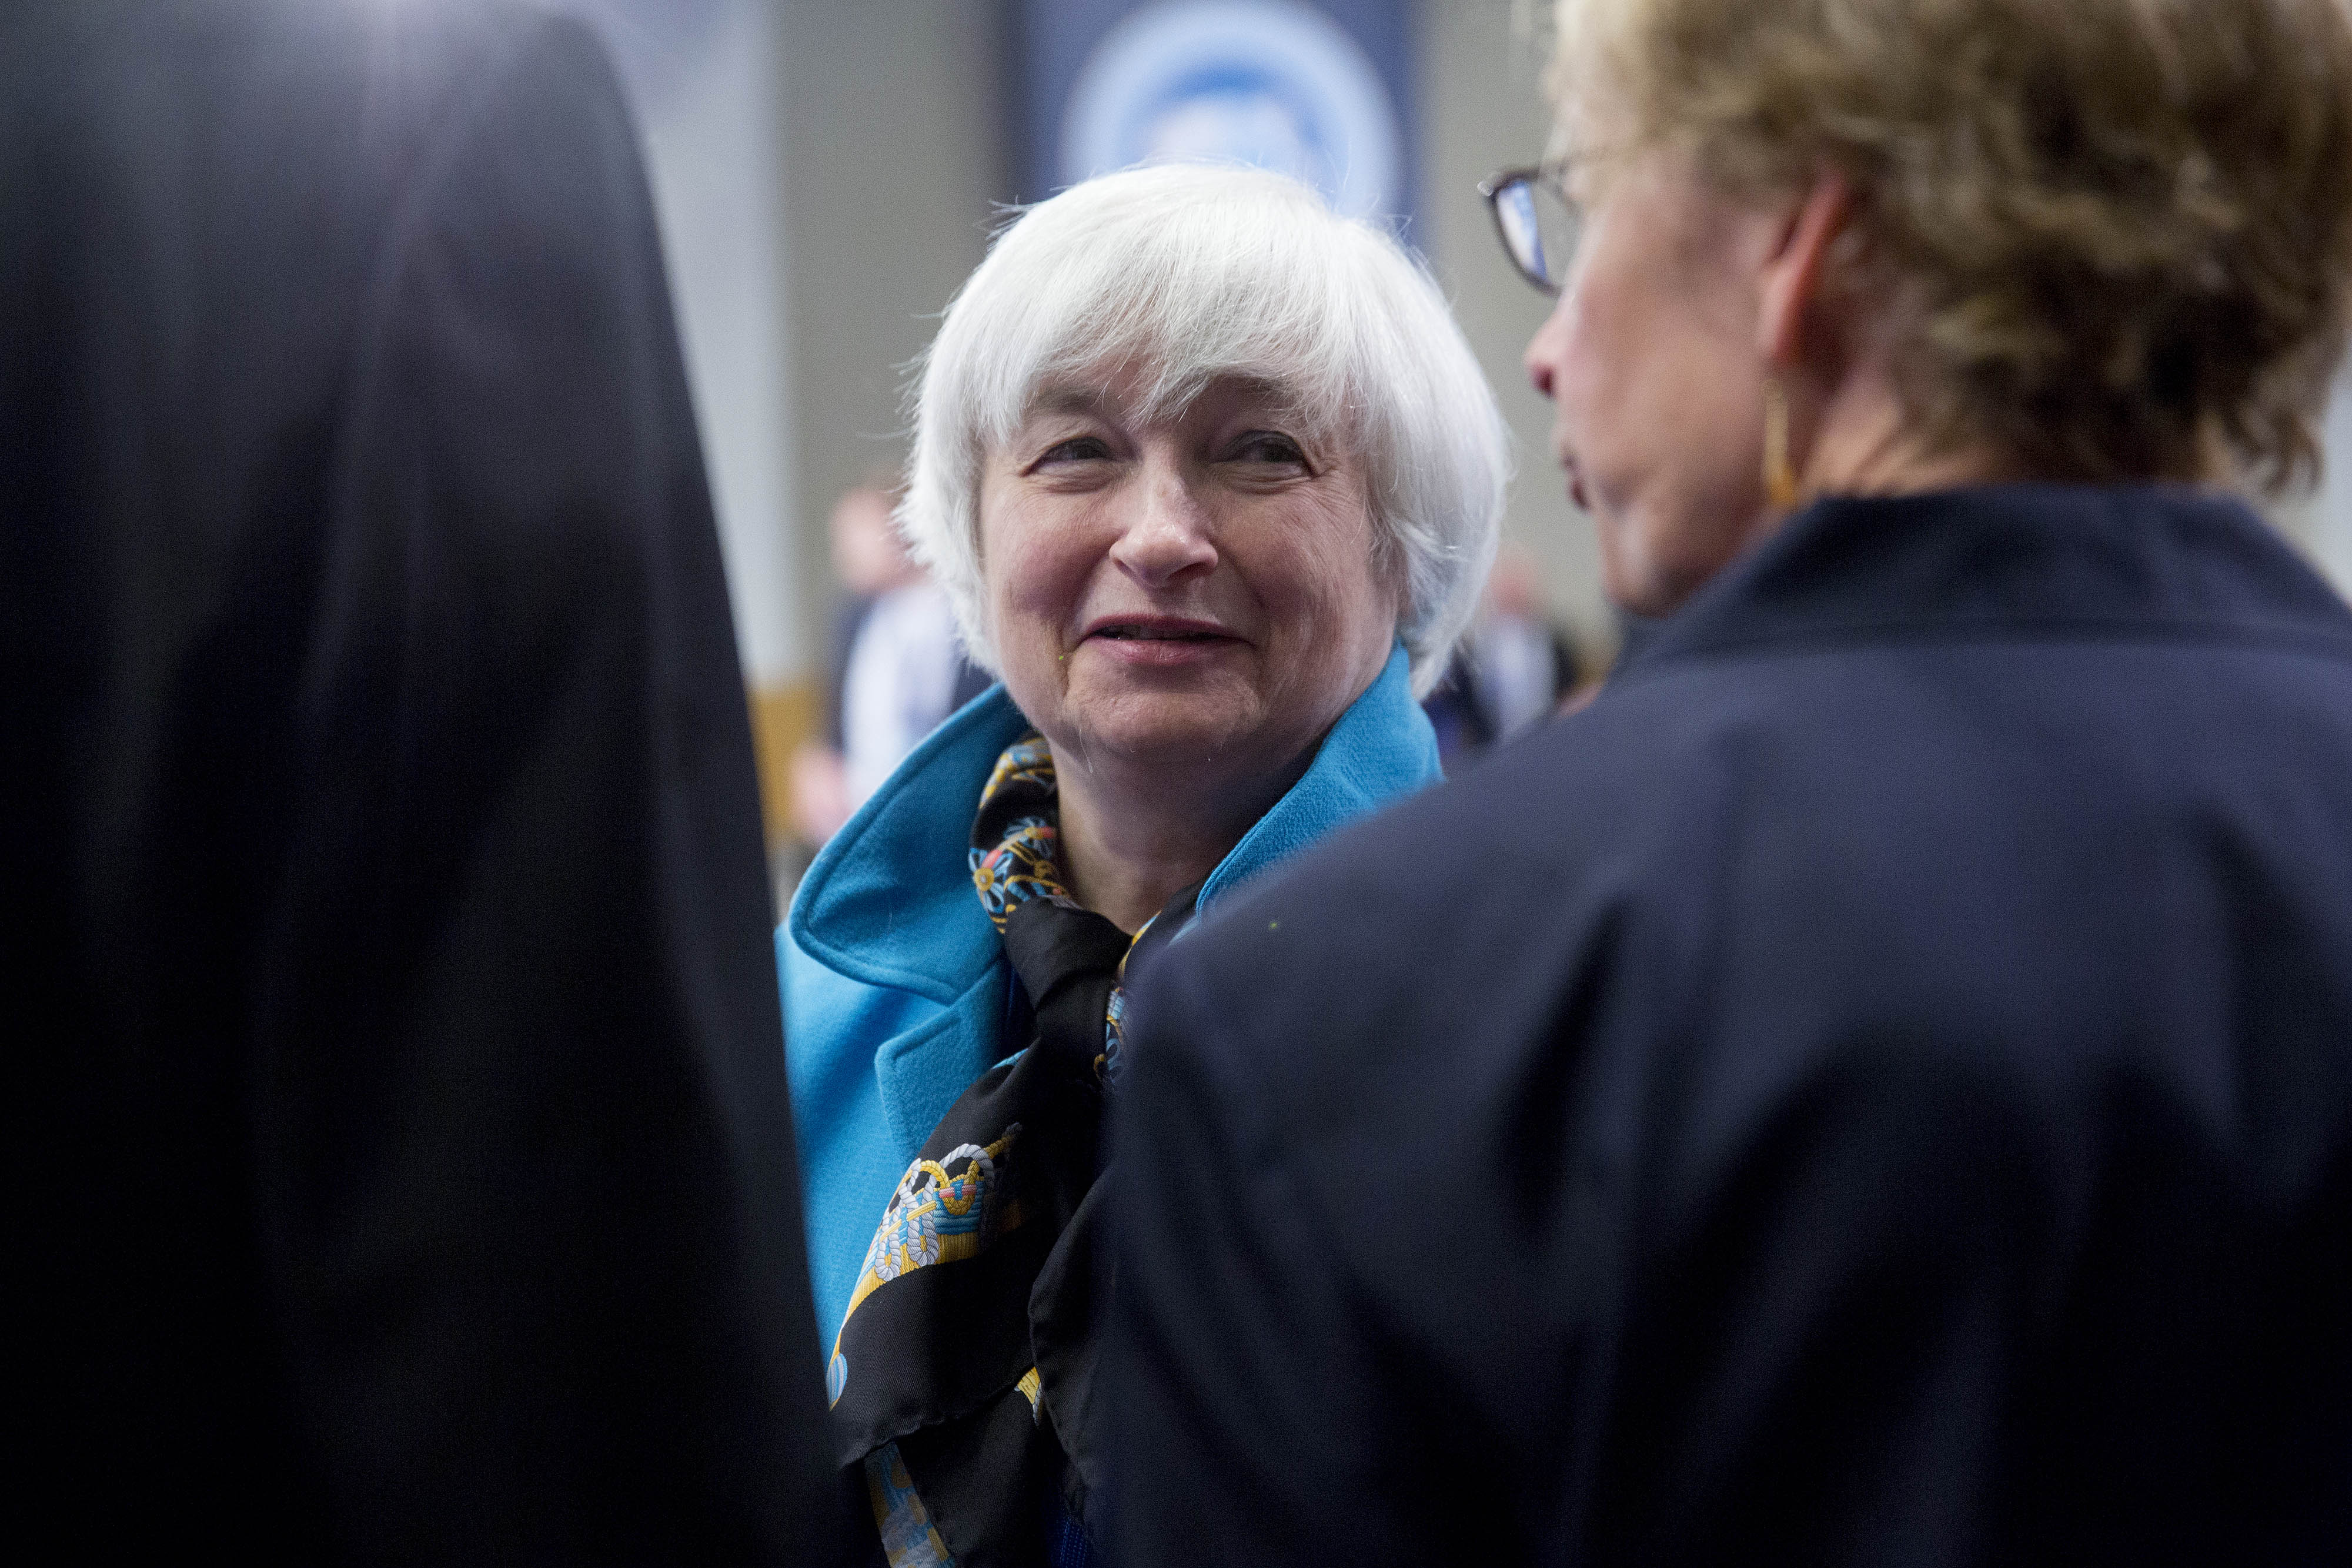 Federal Reserve Chair Janet Yellen.
